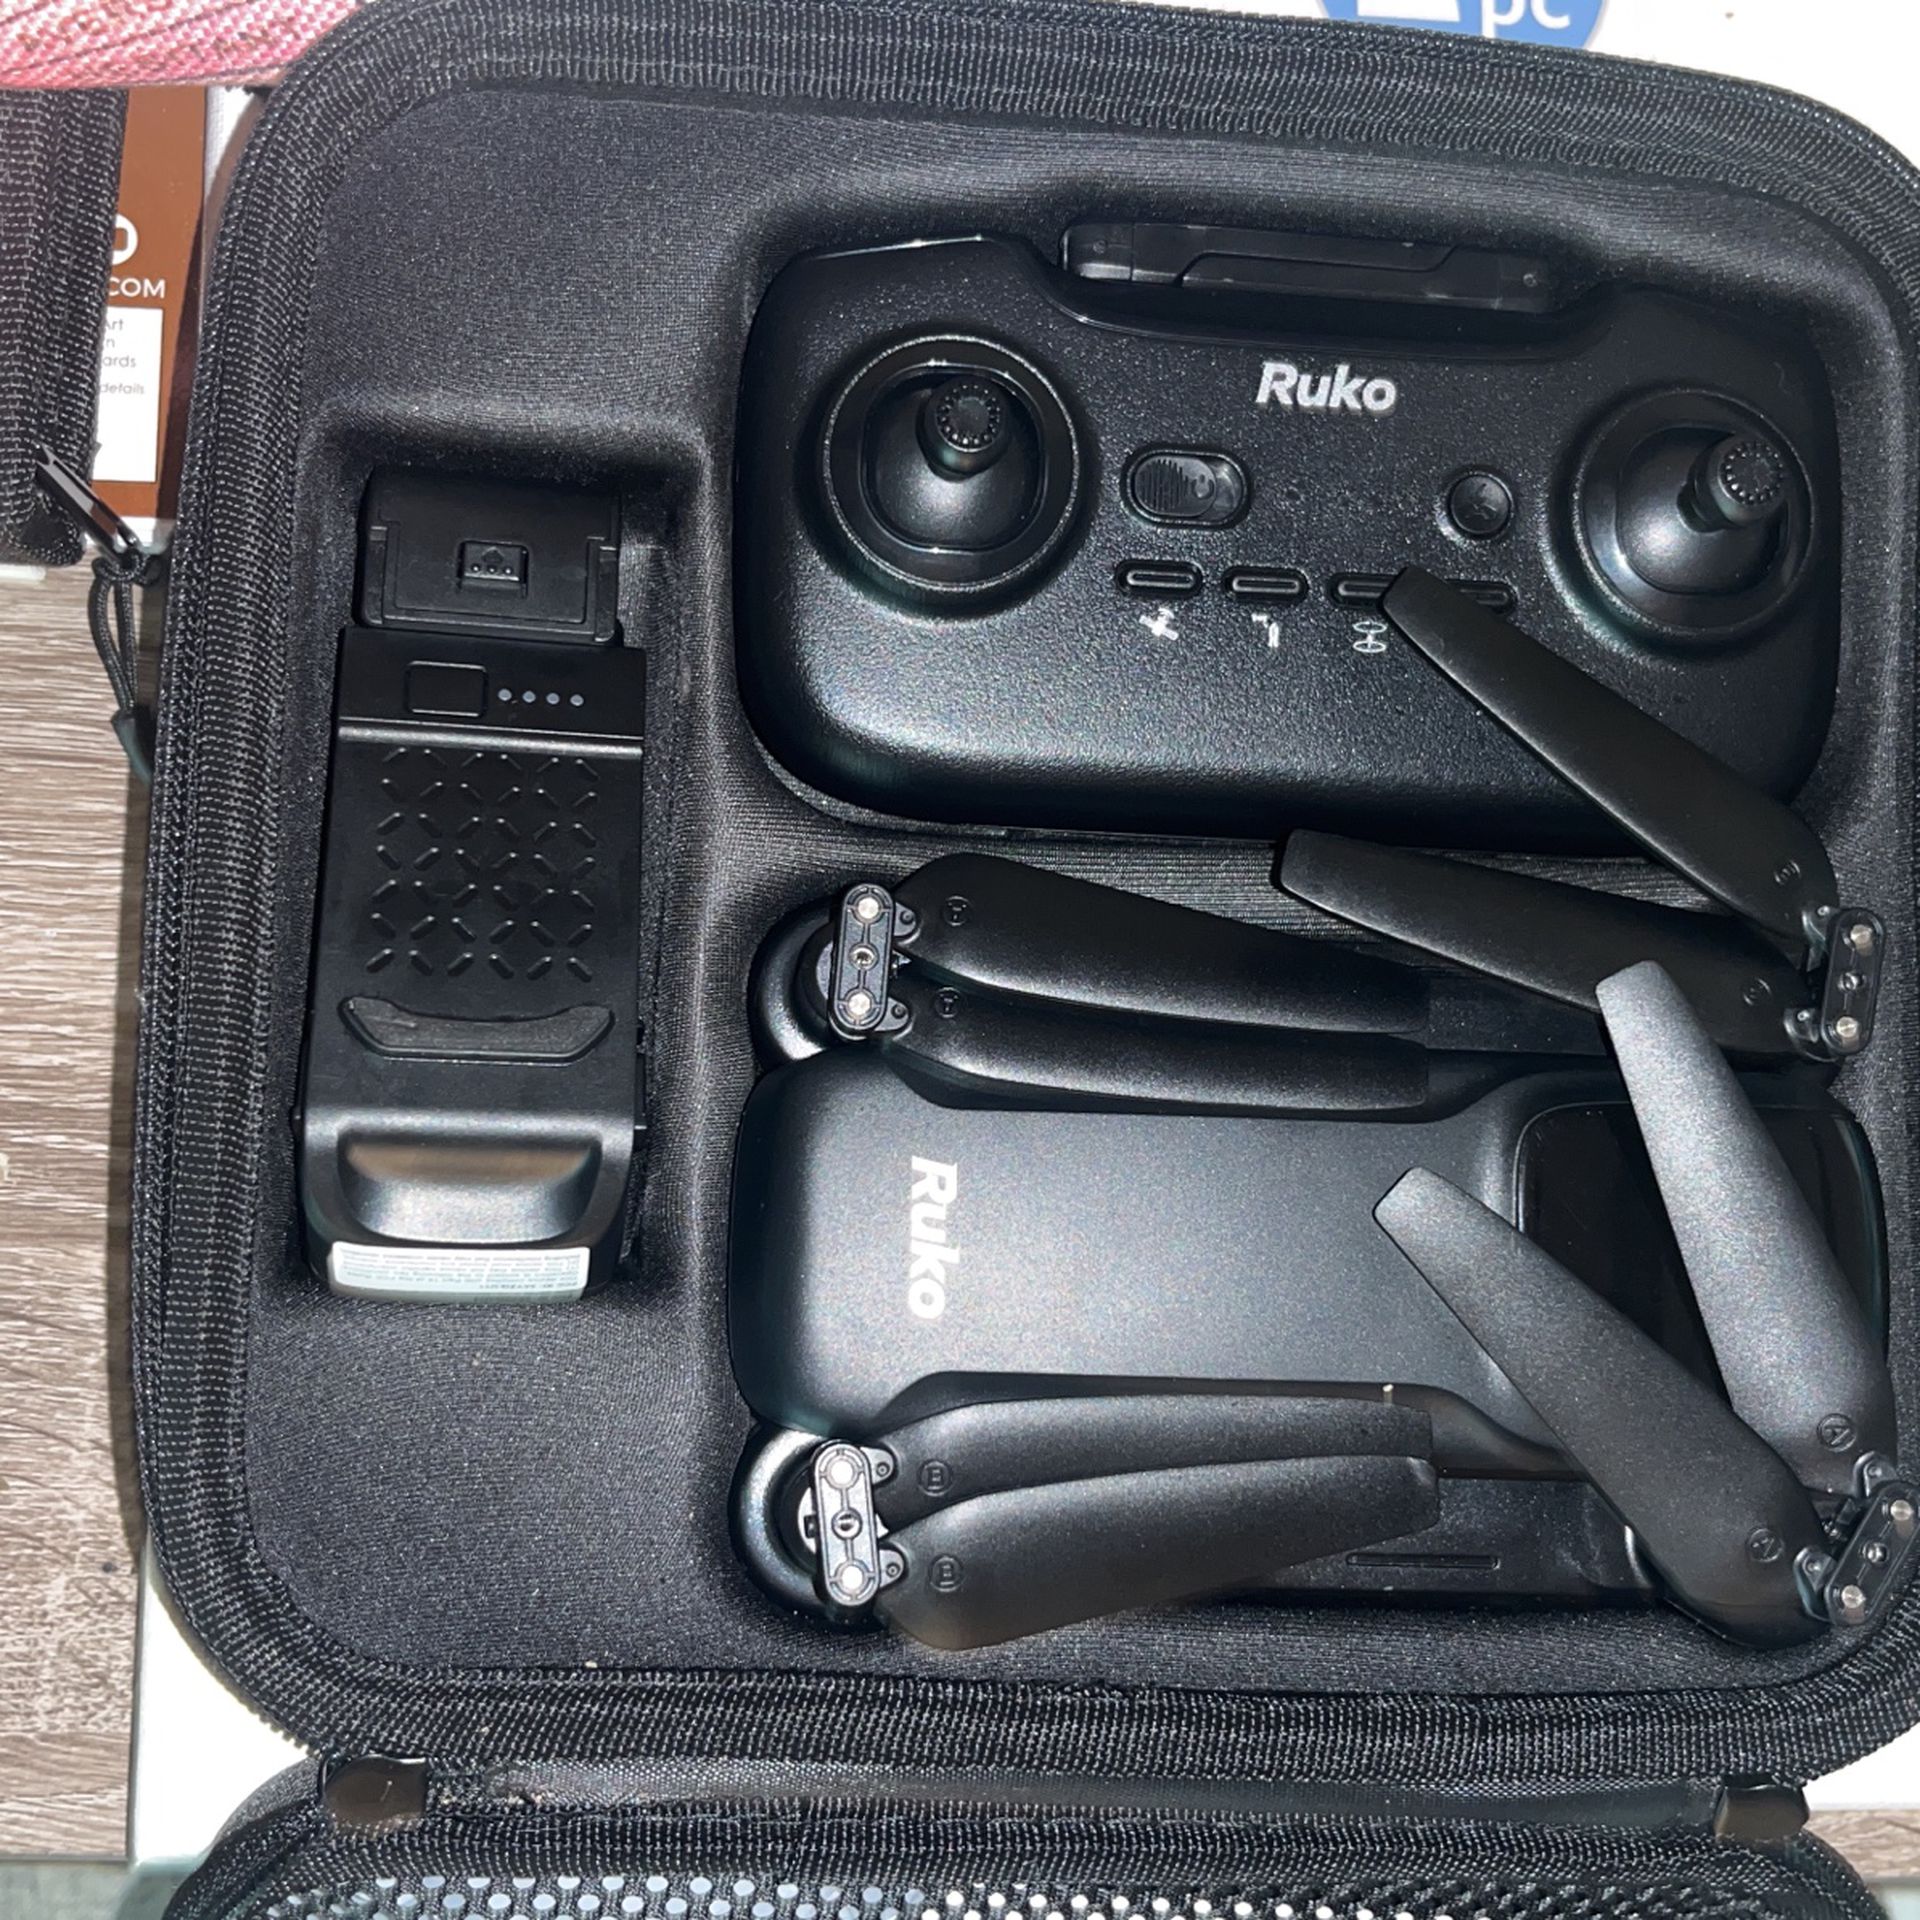 RUKO Drone, Battery Pack, Controller And Carrying Case 